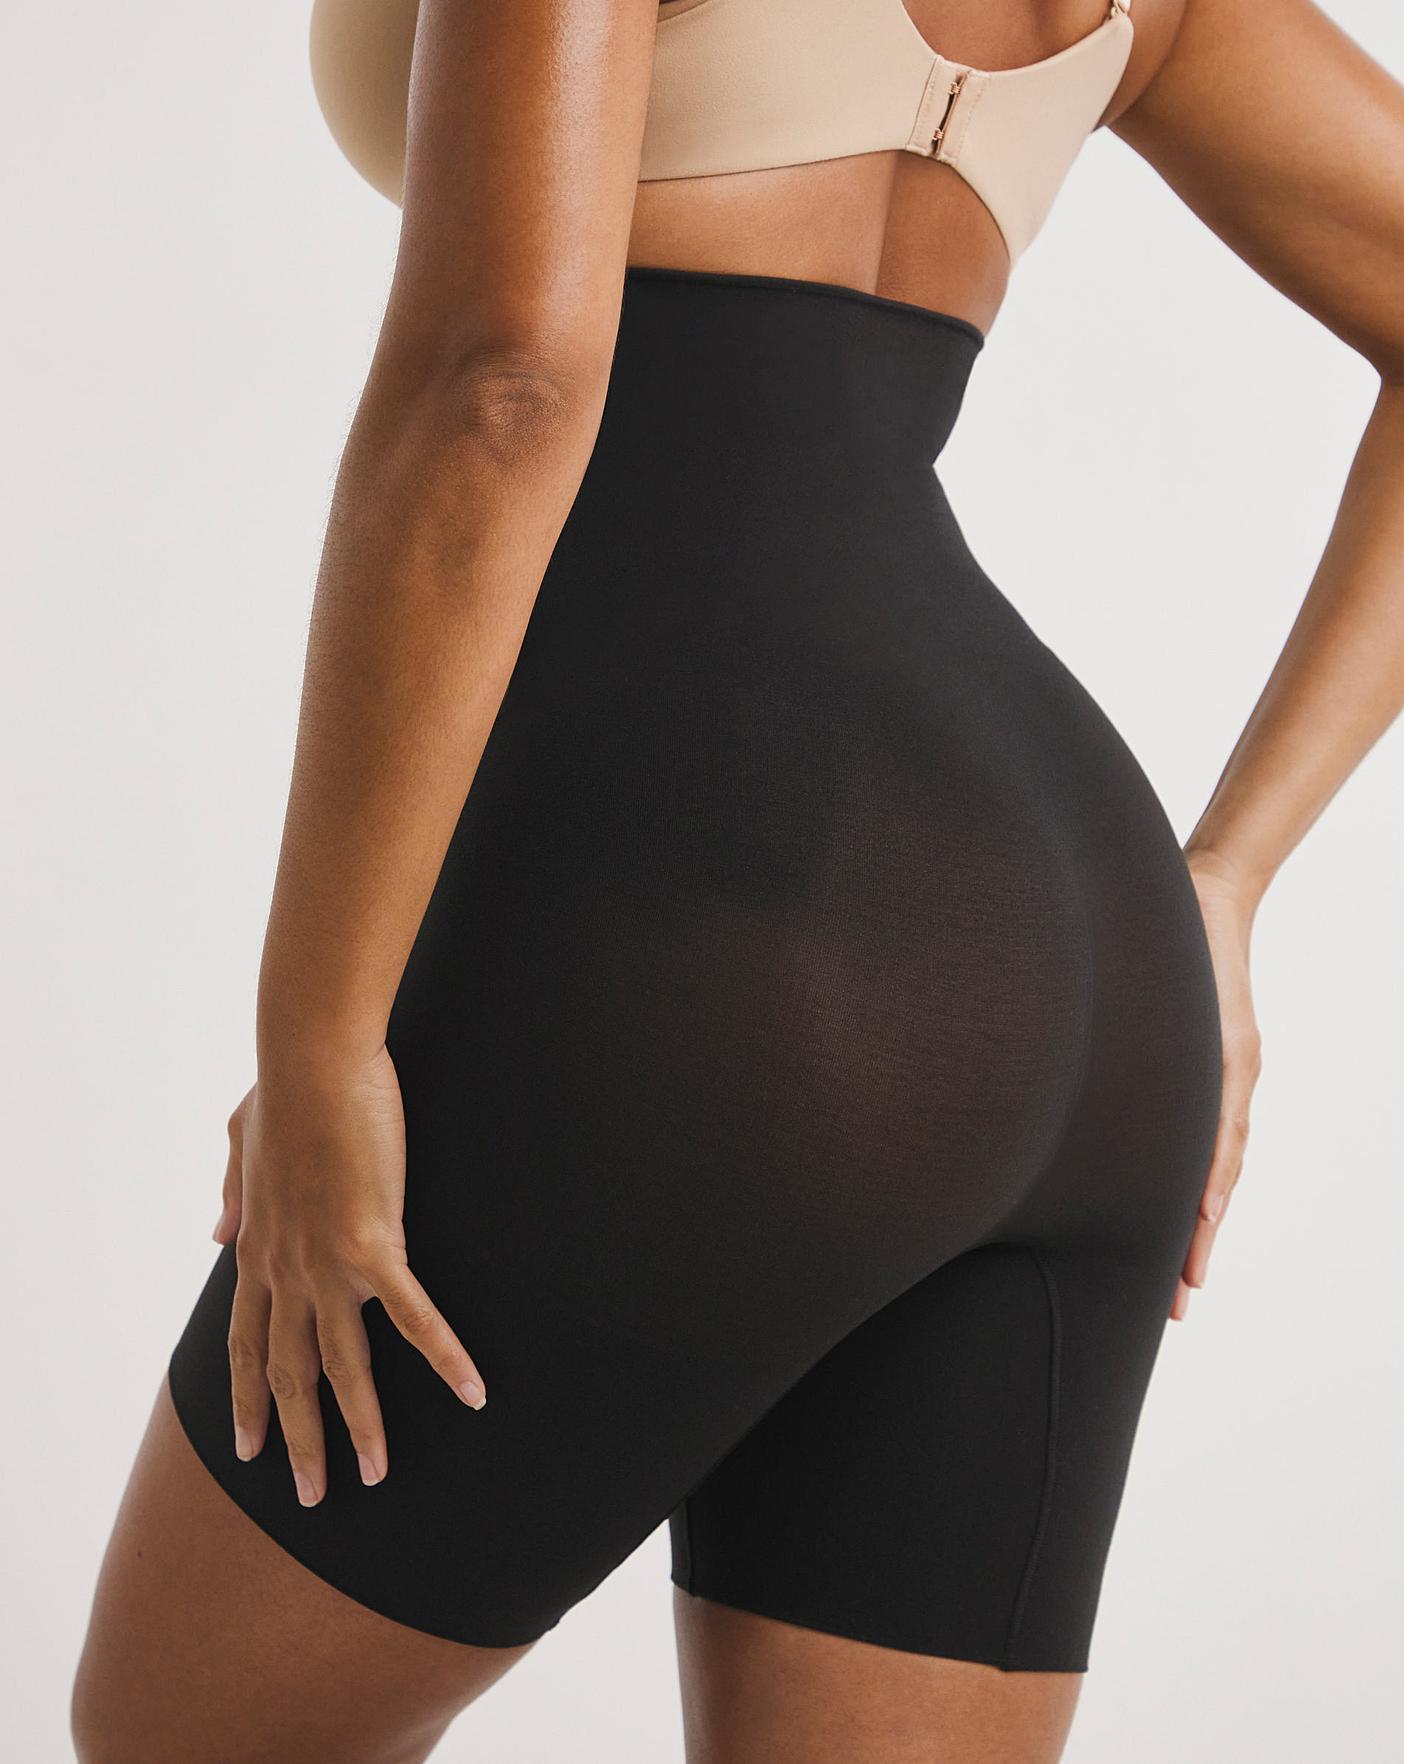 New Assets by Spanx High Waist Shaping Sheers Shape Wear Black